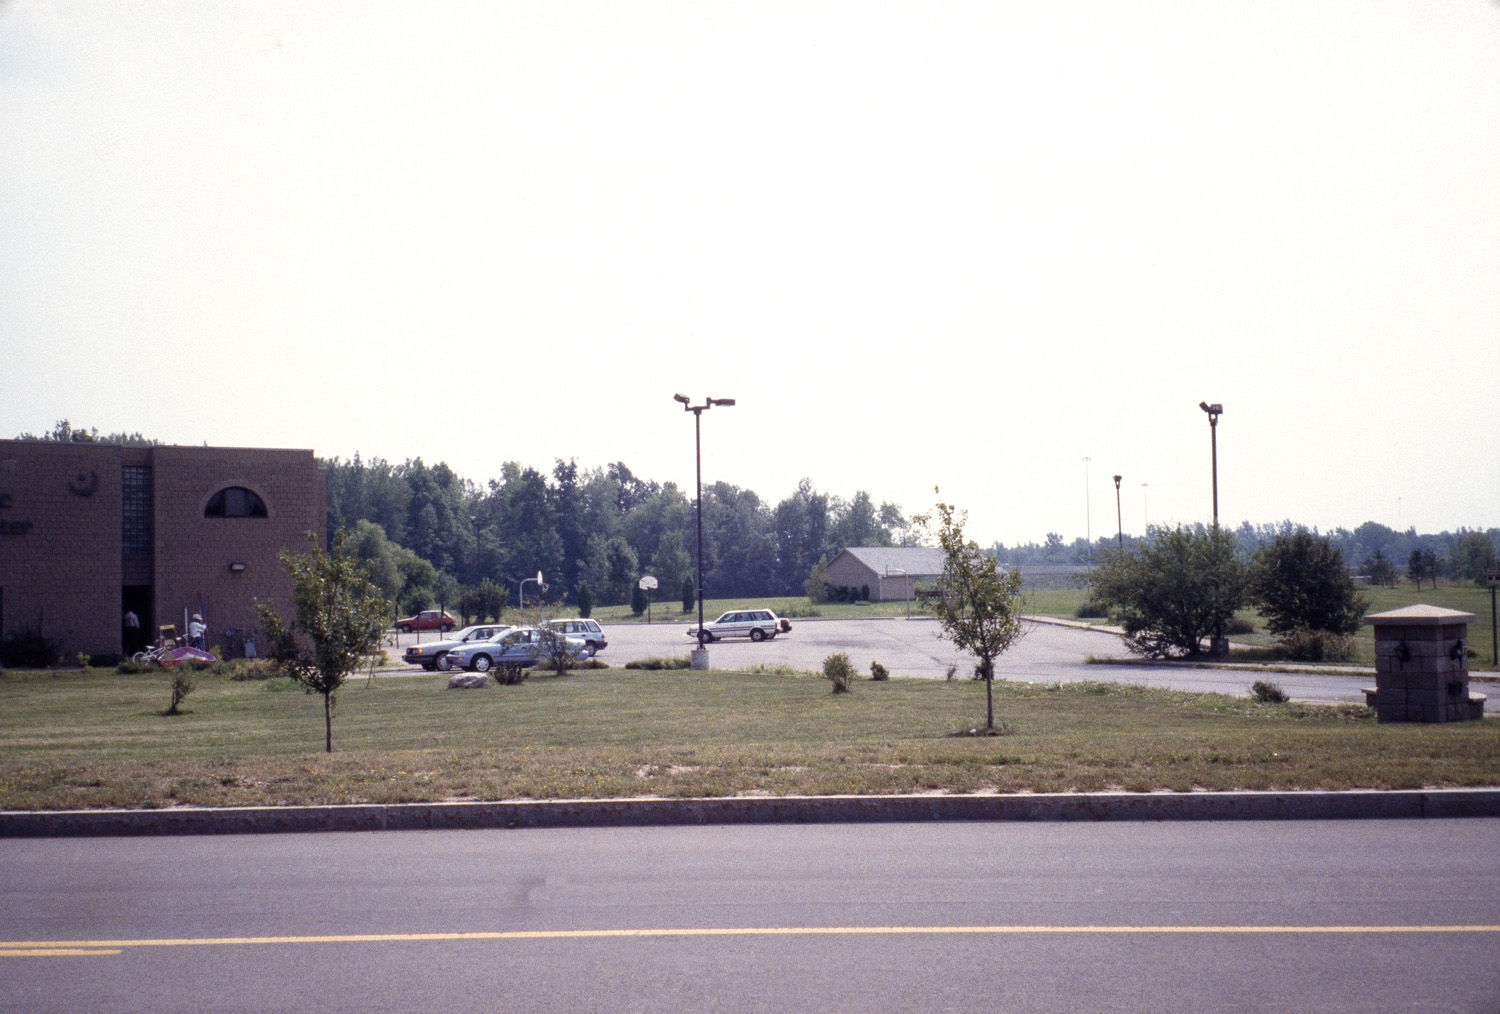 North corner of building and parking lot, prior to expansion